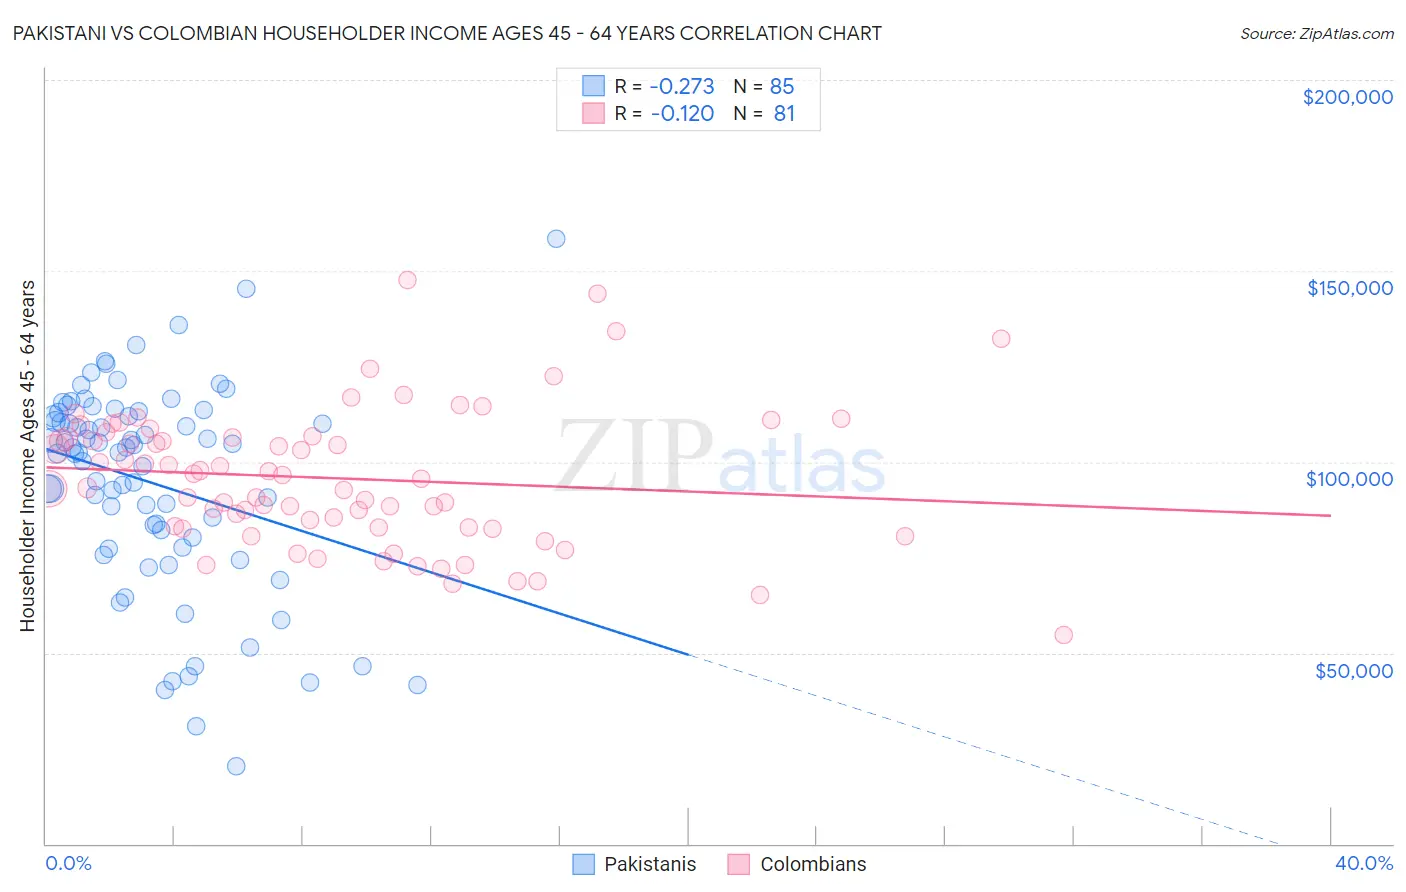 Pakistani vs Colombian Householder Income Ages 45 - 64 years